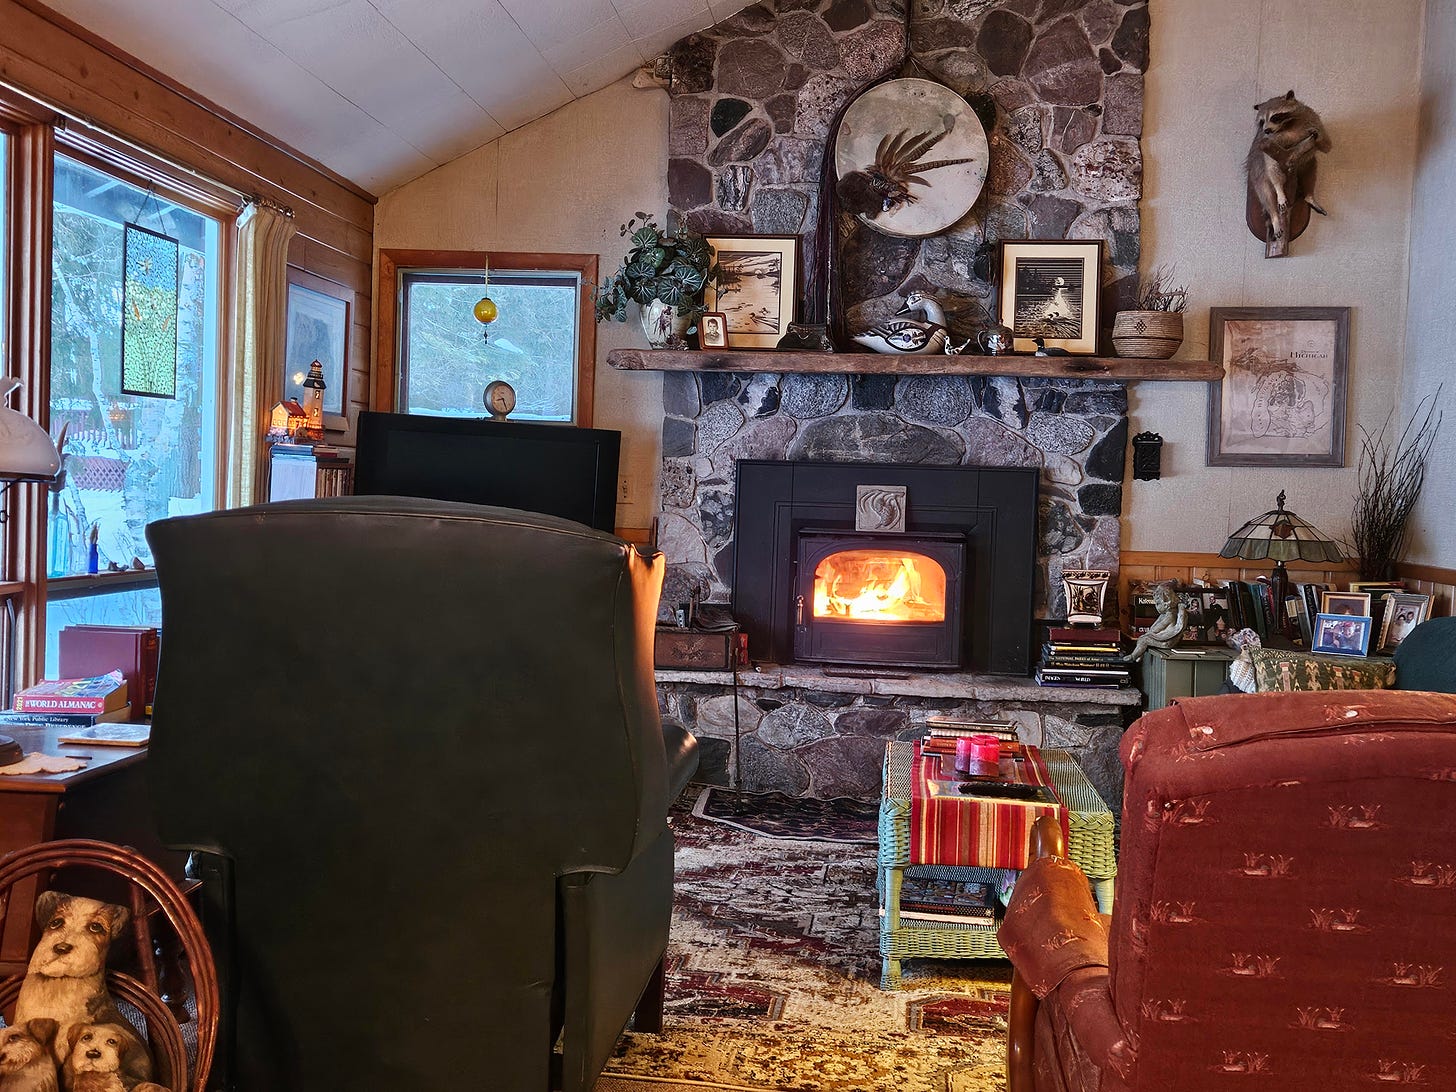 A cabin living room with roaring fire in the stone fireplace.